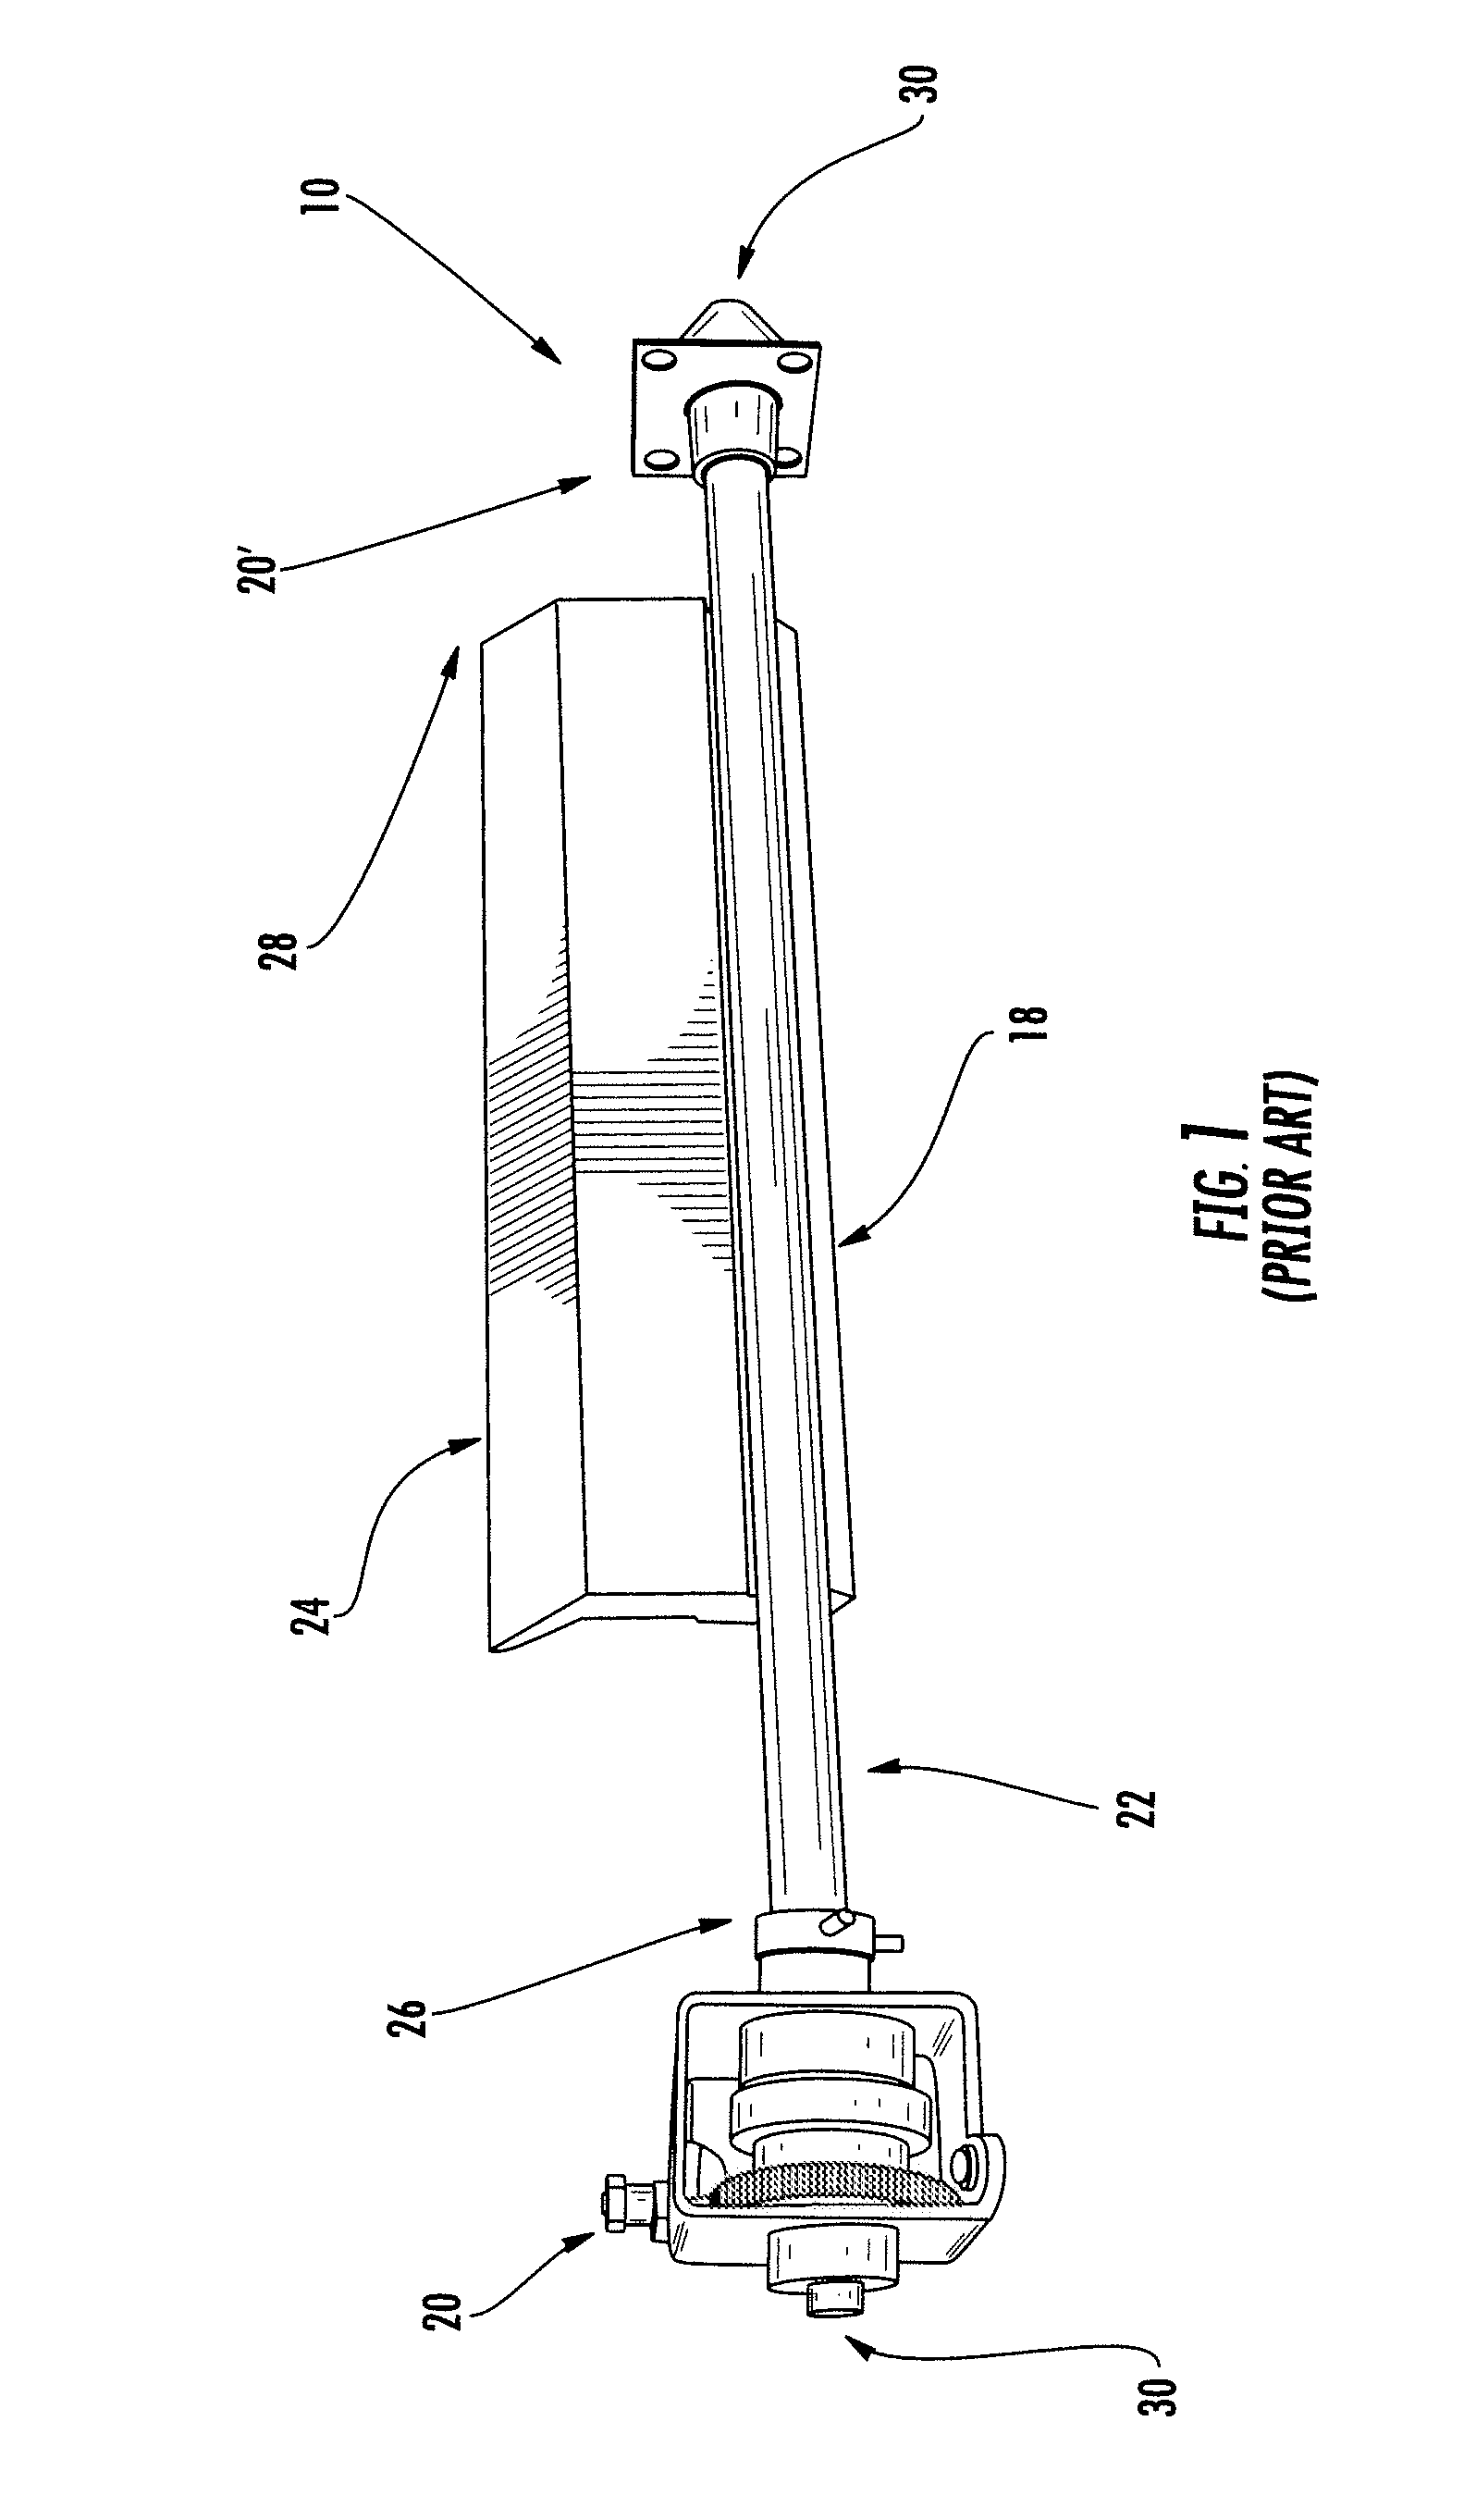 Constant pressure and variable cleaning angle scraper blade and method for designing same